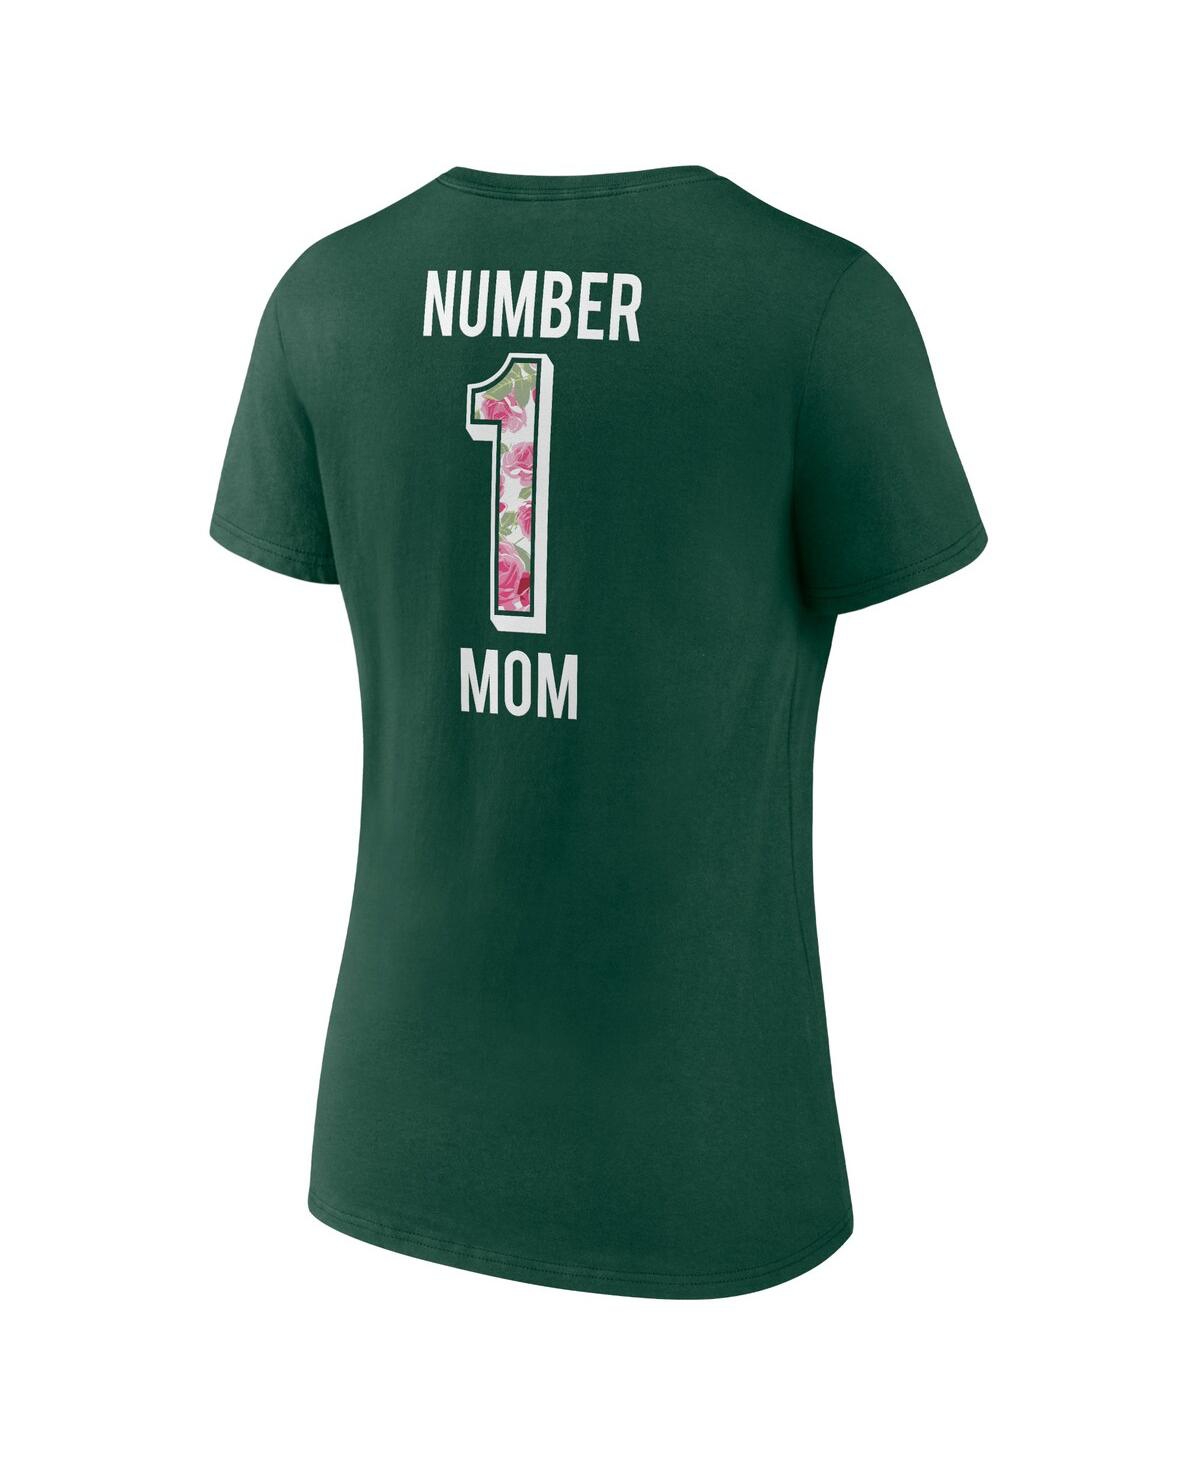 Shop Fanatics Women's  Green Green Bay Packers Plus Size Mother's Day #1 Mom V-neck T-shirt